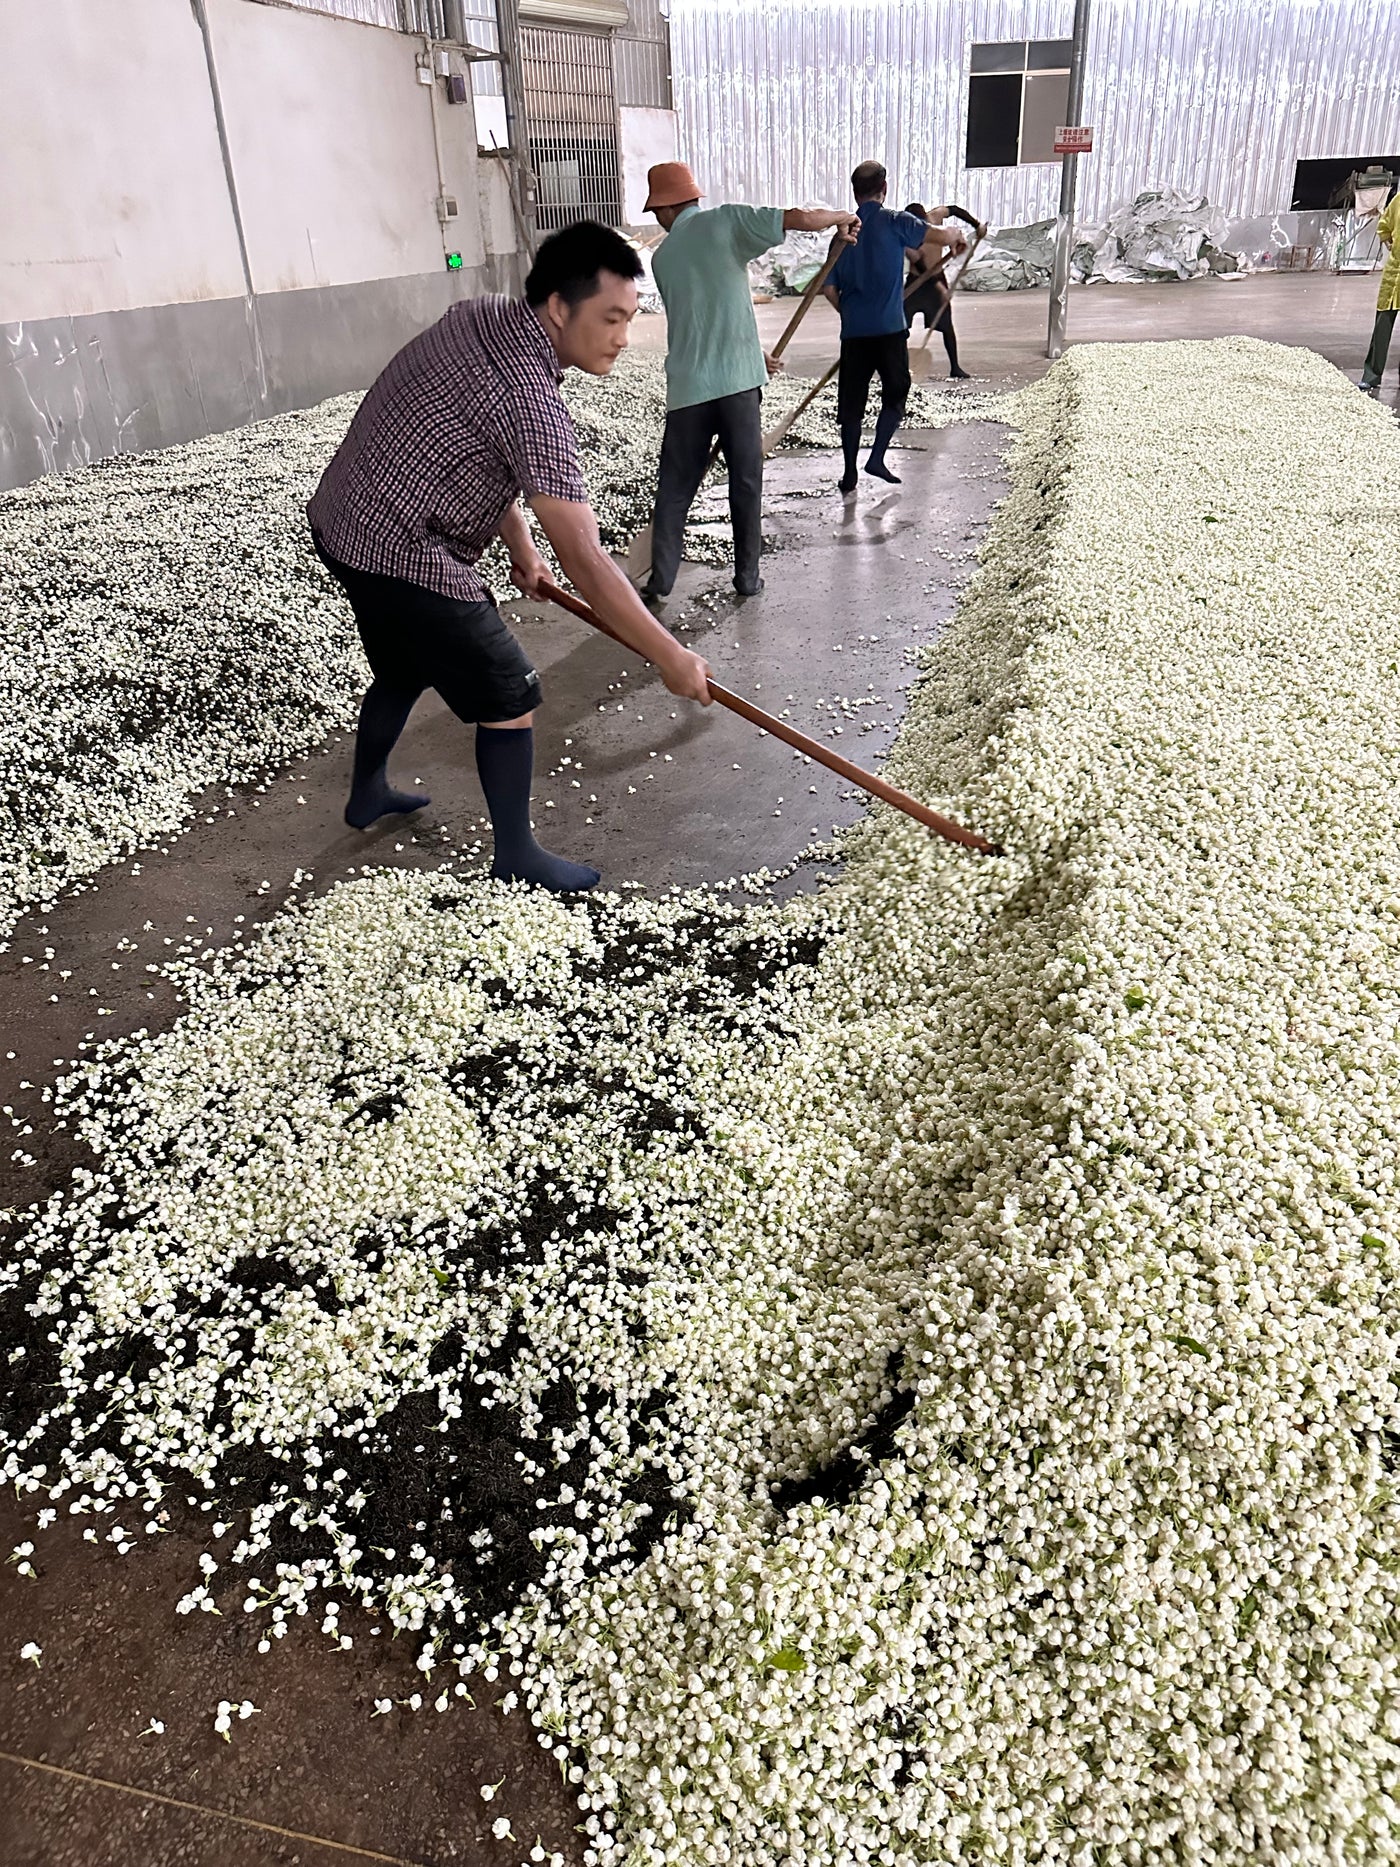 Tea worker raking green tea and jasmine blossoms to combine for the scenting process.